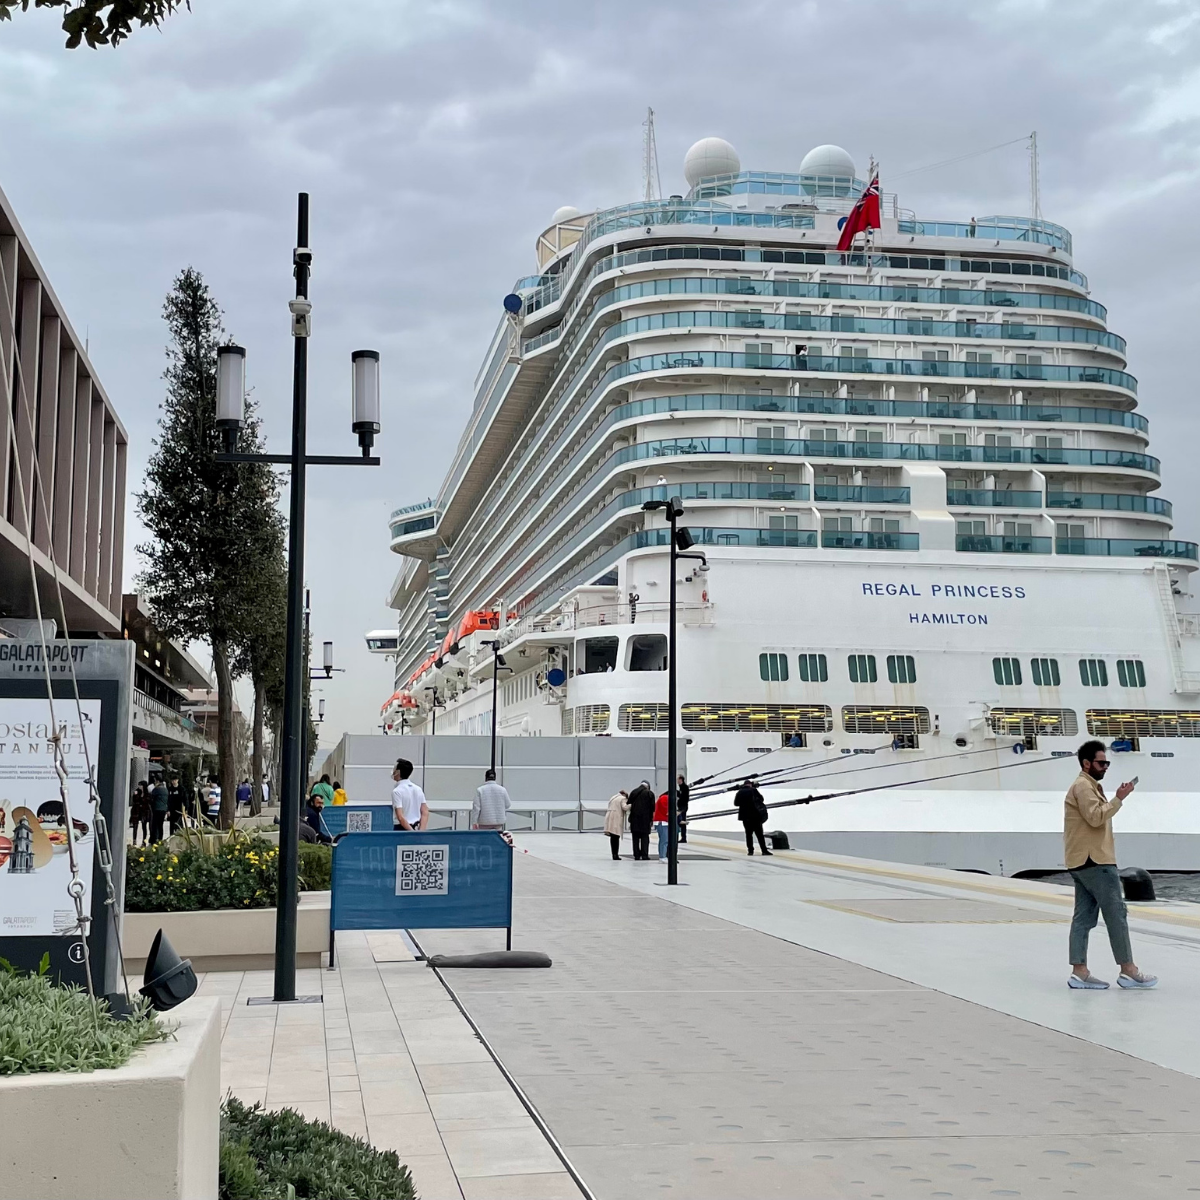 Galataport Mall. Galataport and Cruise Ship in Istanbul Editorial